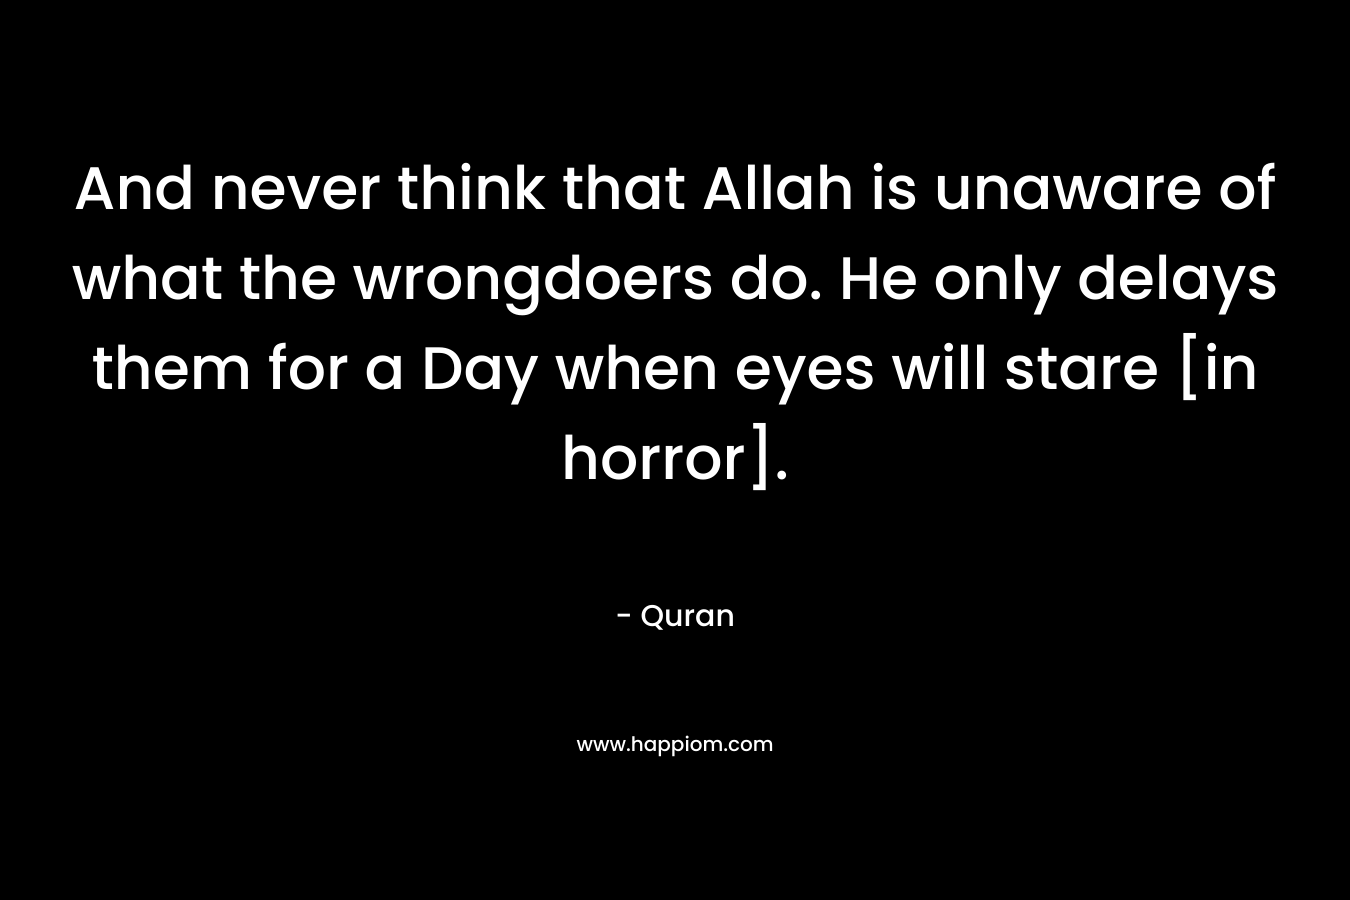 And never think that Allah is unaware of what the wrongdoers do. He only delays them for a Day when eyes will stare [in horror]. – Quran